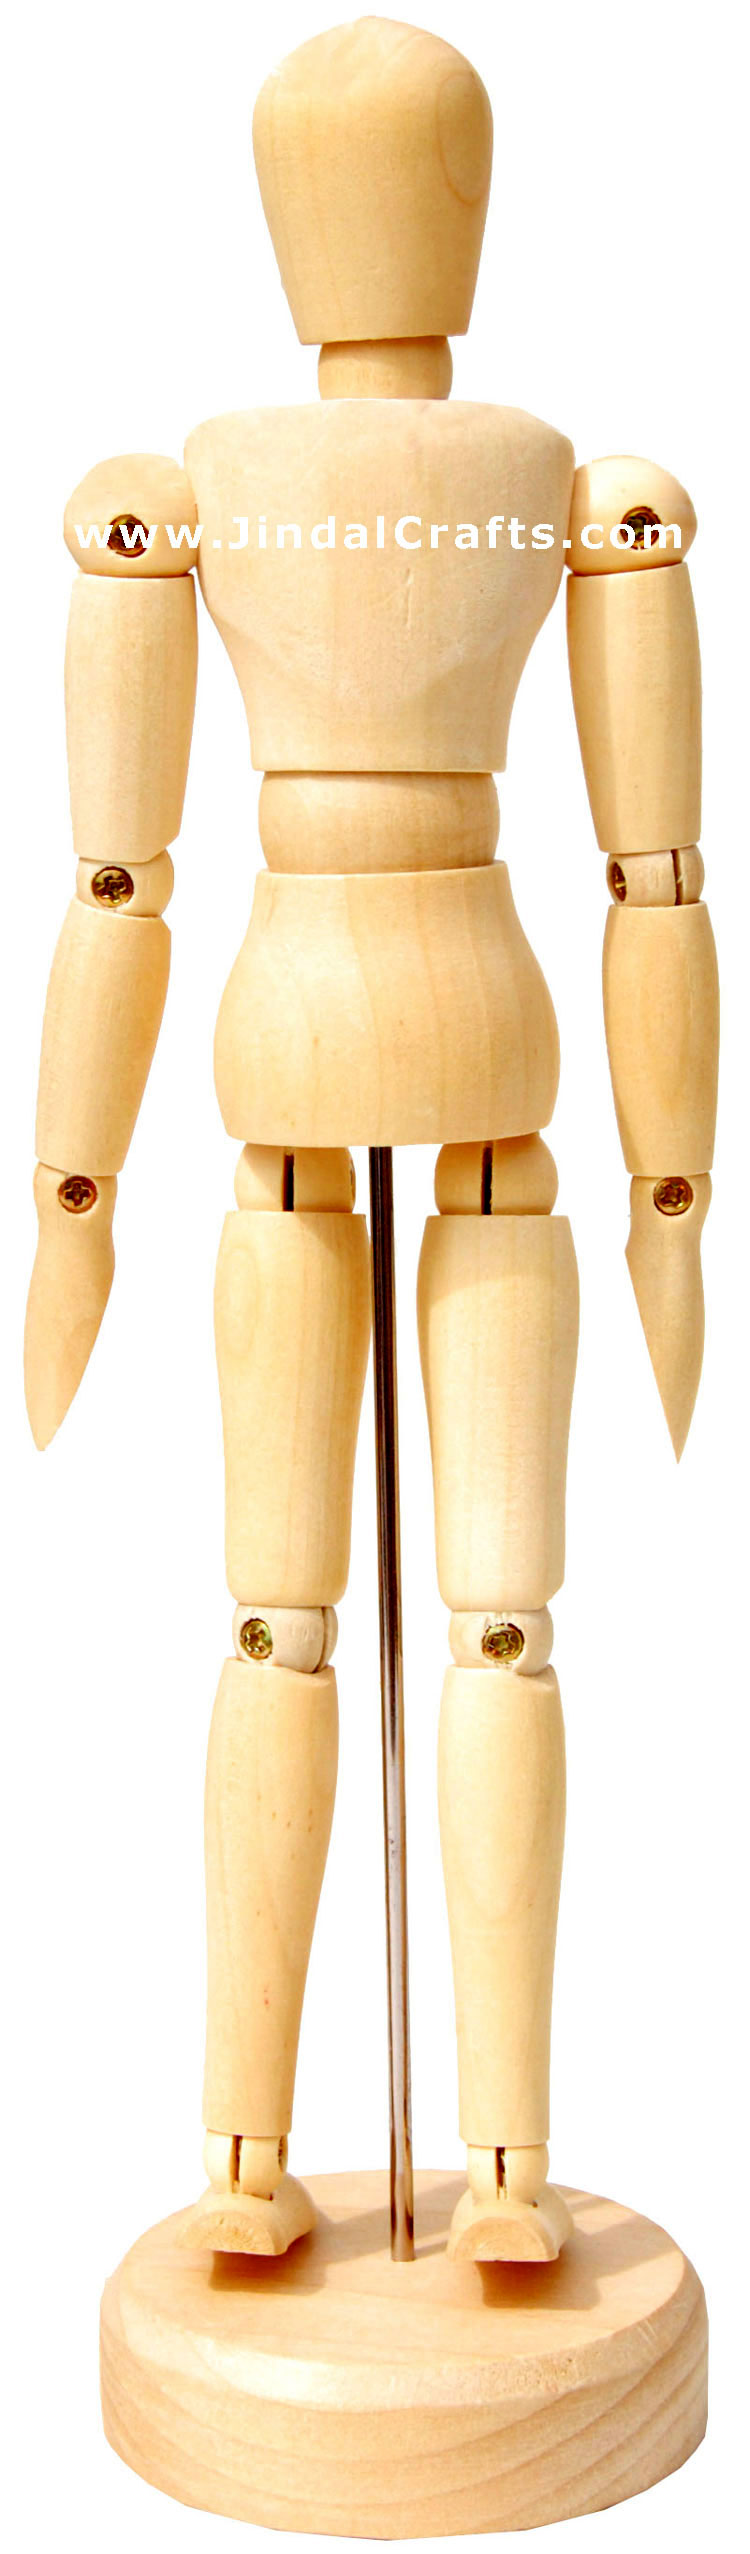 Handmade Wooden Free Body Toy India Traditional